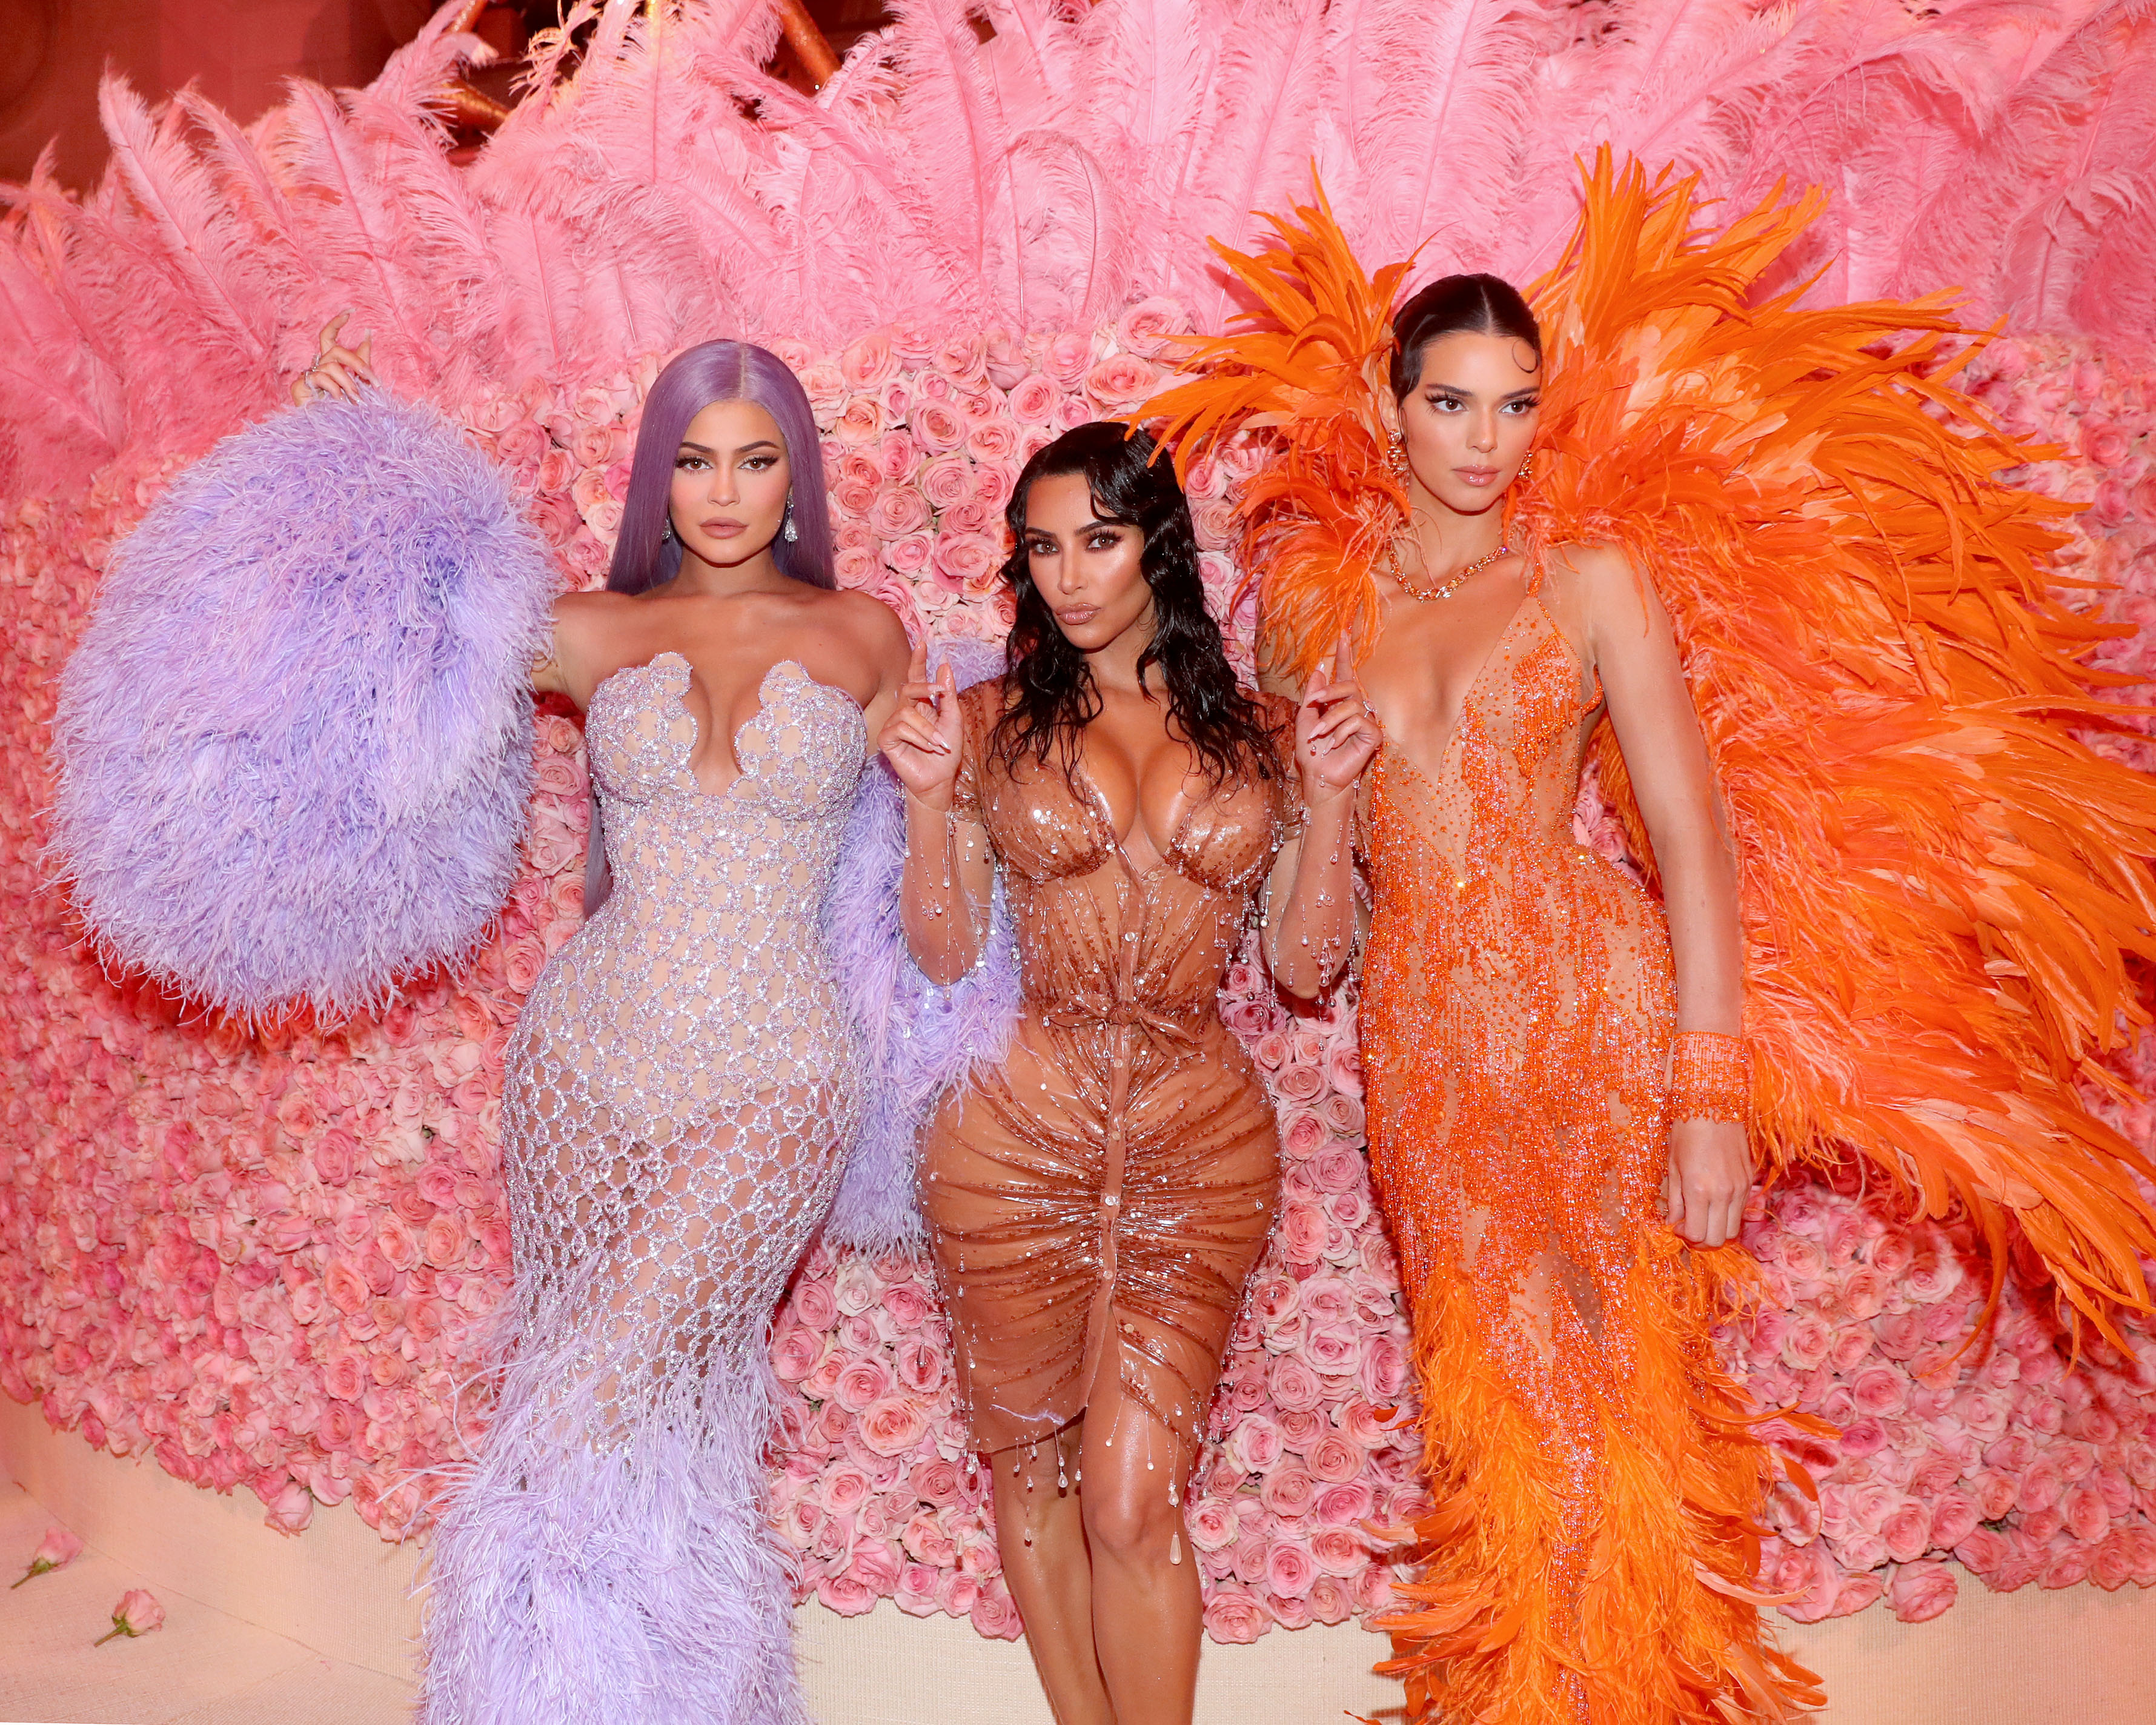 Kim and her sisters, Kylie and Kendall Jenner, all attended last year's gala